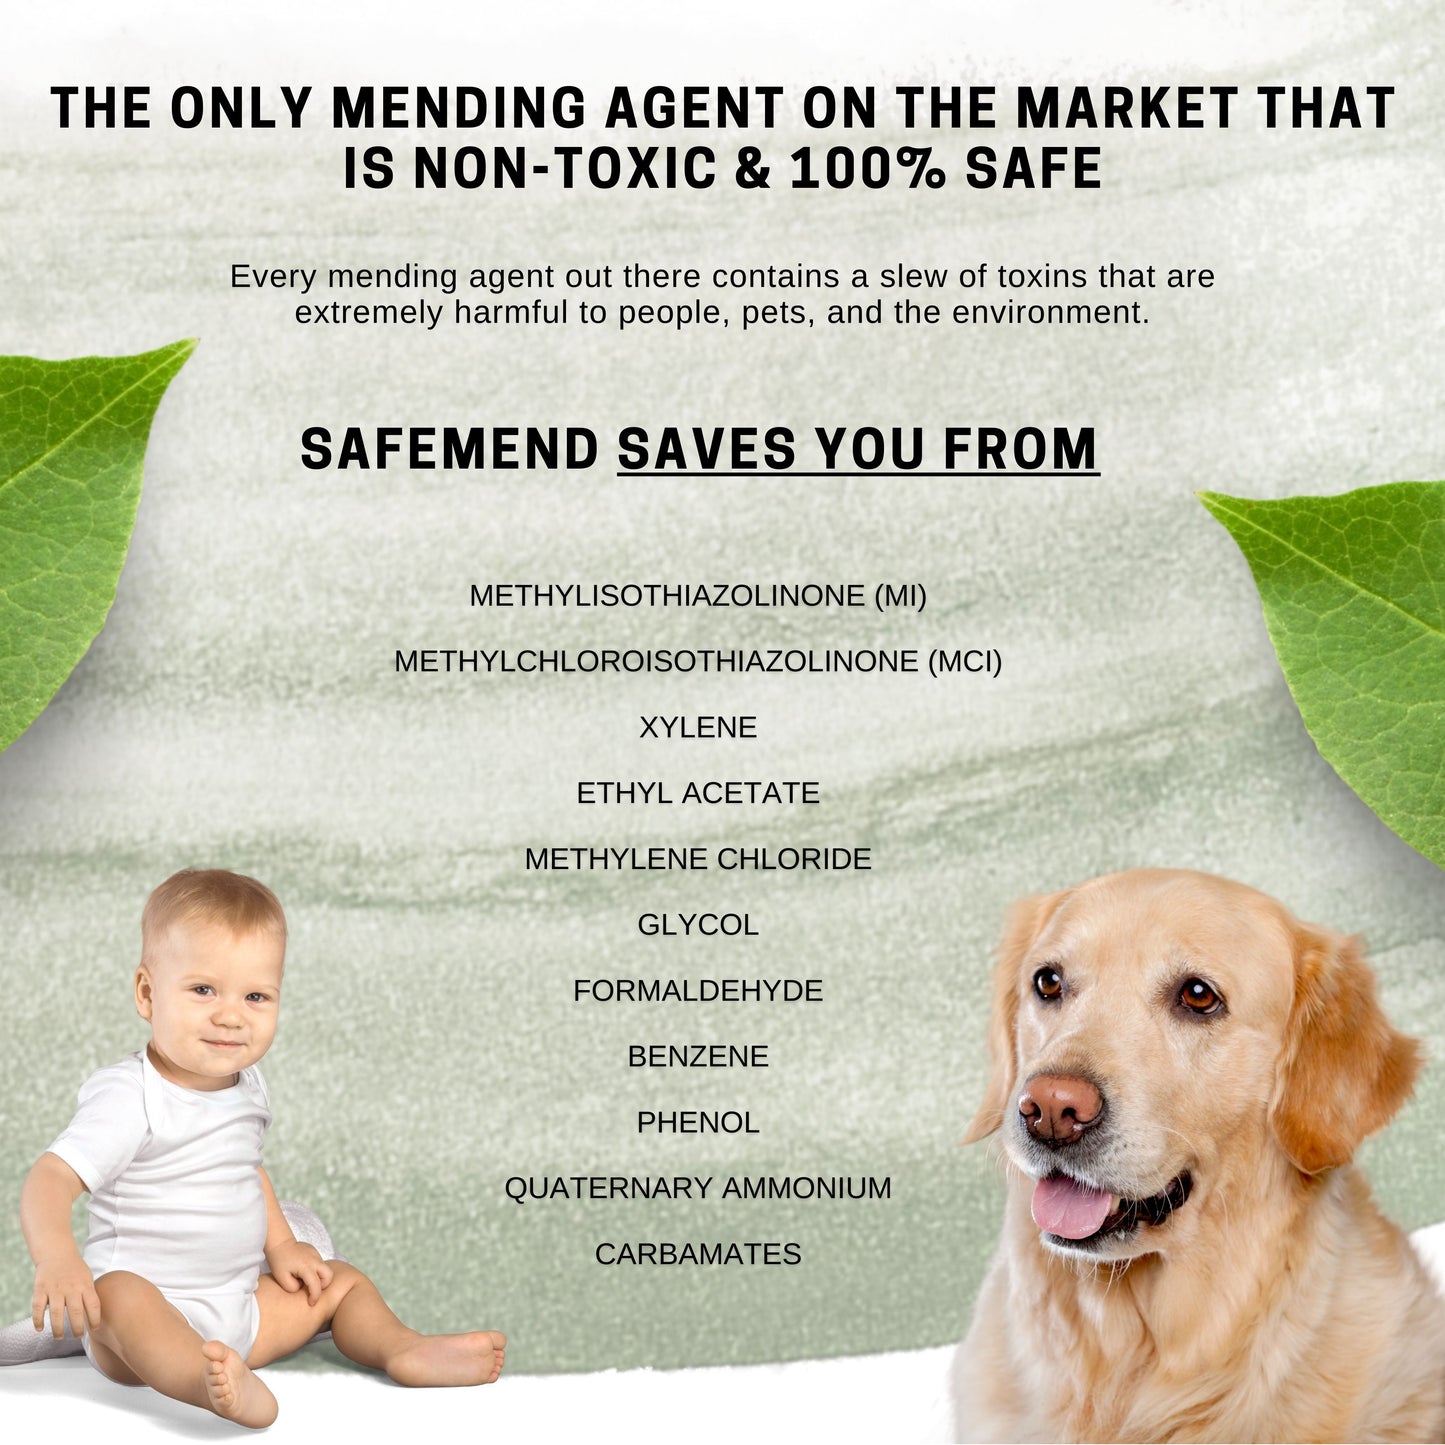 SafeMend™: Non-Toxic Wall Repair Solution